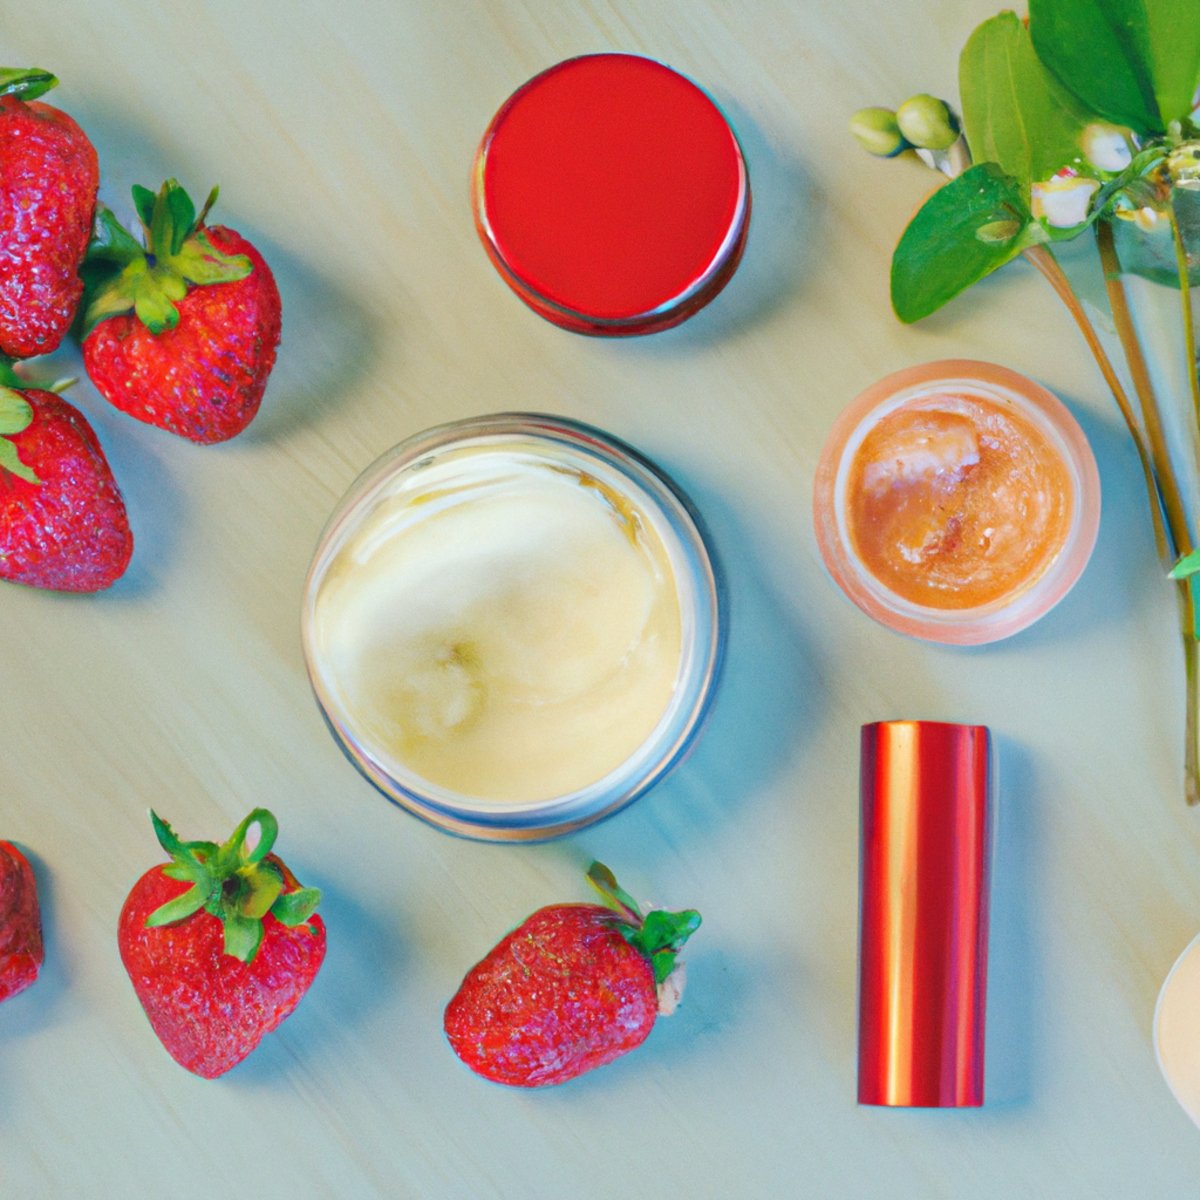 Natural beauty remedies - Close-up of DIY lip treatment essentials: creamy lip balm, fresh strawberries, ripe avocado, mint leaves, essential oils. Organic and enticing.